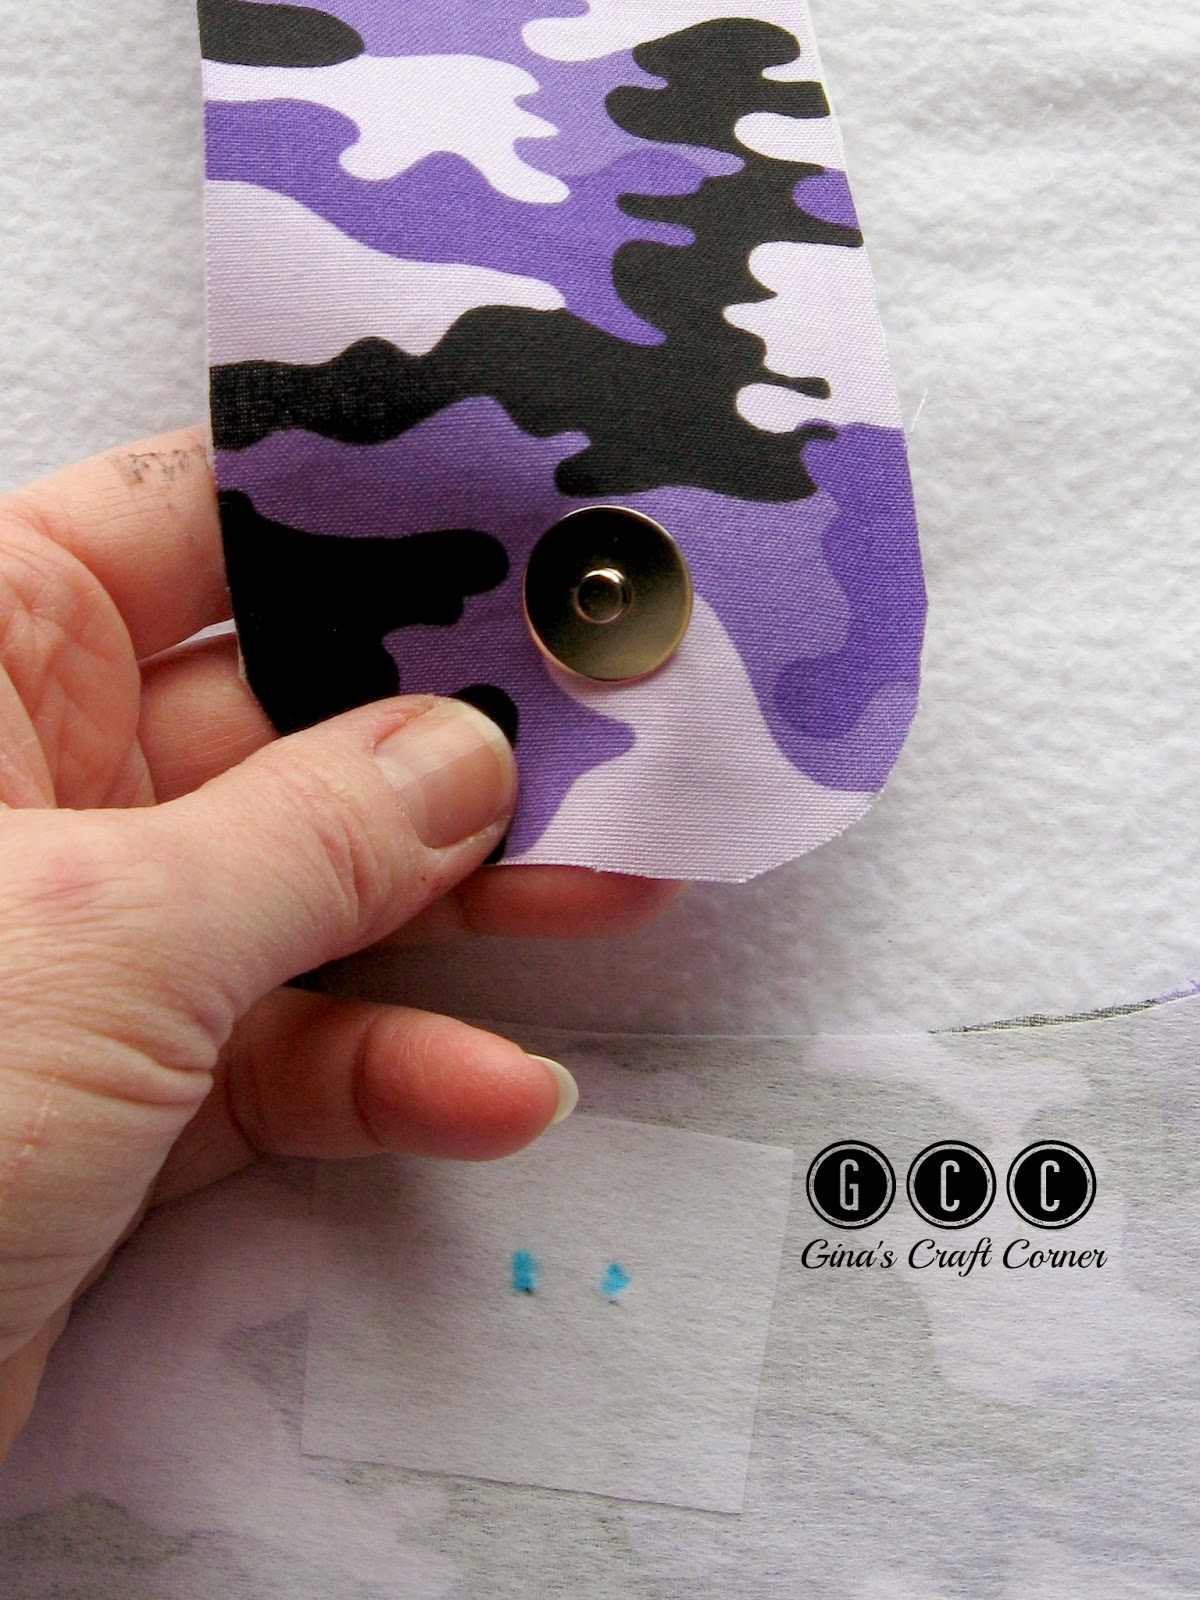 How to add magnets to your handbags by Gina's Craft Corner